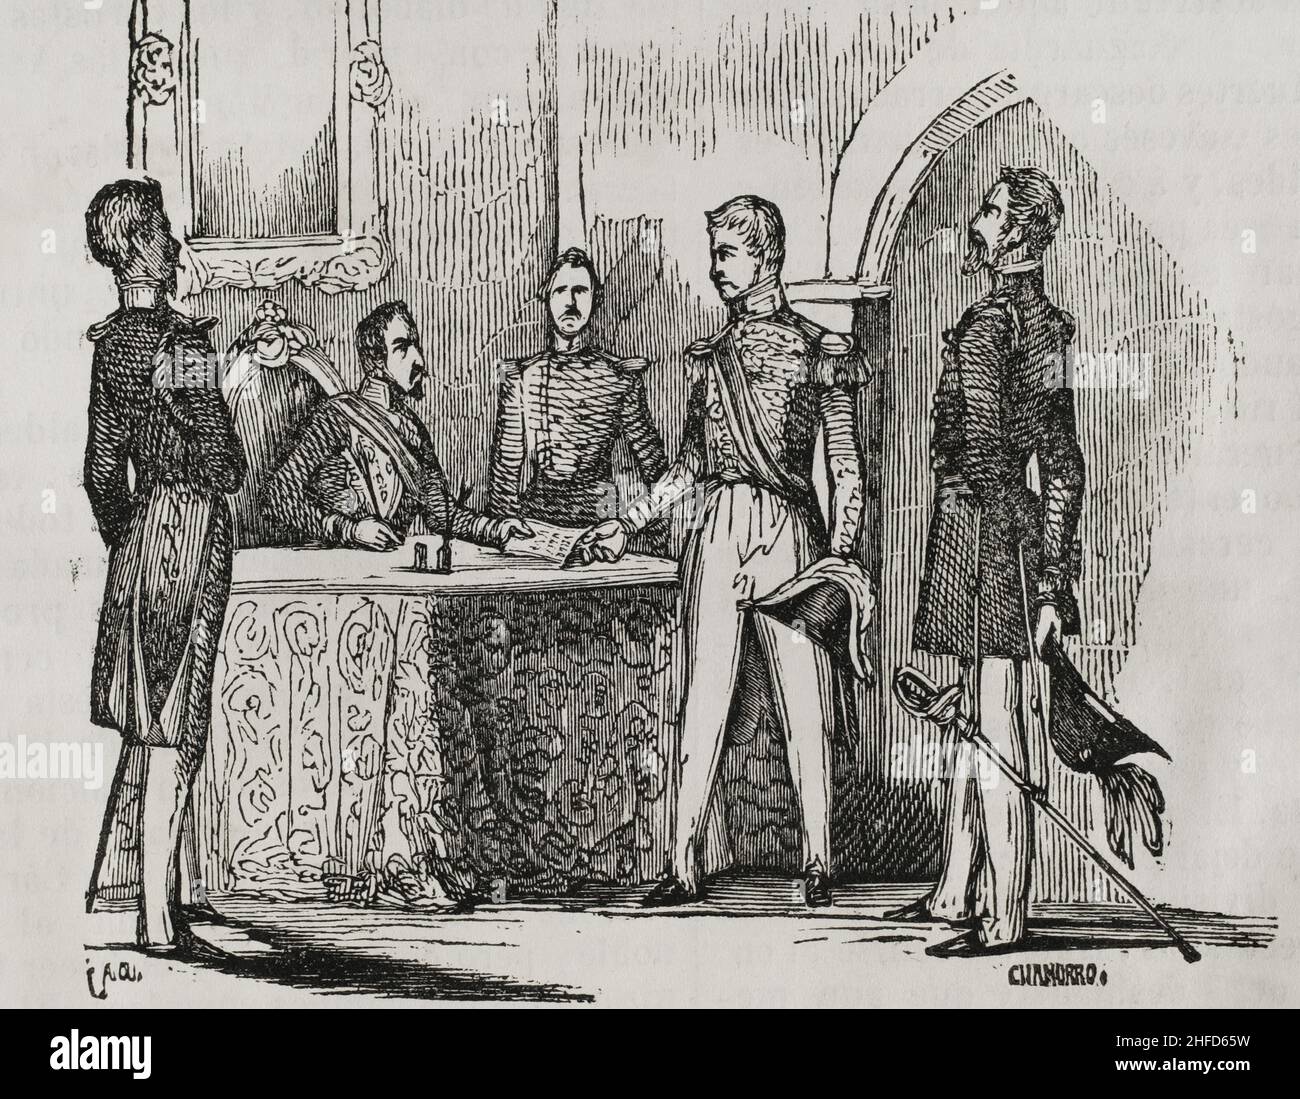 History of Spain. First Carlist War (1833-1840). The Eliot Treaty. The British diplomat Edward Granville Eliot travelled to the Basque provinces as a representative of the British government to reach an agreement between Carlists and Liberals that would allow the lives of prisoners of war to be respected. On 27th and 28th April 1835, the treaty was signed in Asarta and Logroño between Tomás Zamalacárregui (Carlist side), Gerónimo Valdés (Liberal side), Eliot and Lieutenant-Colonel Gurwood. Engraving by Chamorro. Panorama Español, Crónica Contemporánea. Volume III Madrid, 1845. Stock Photo